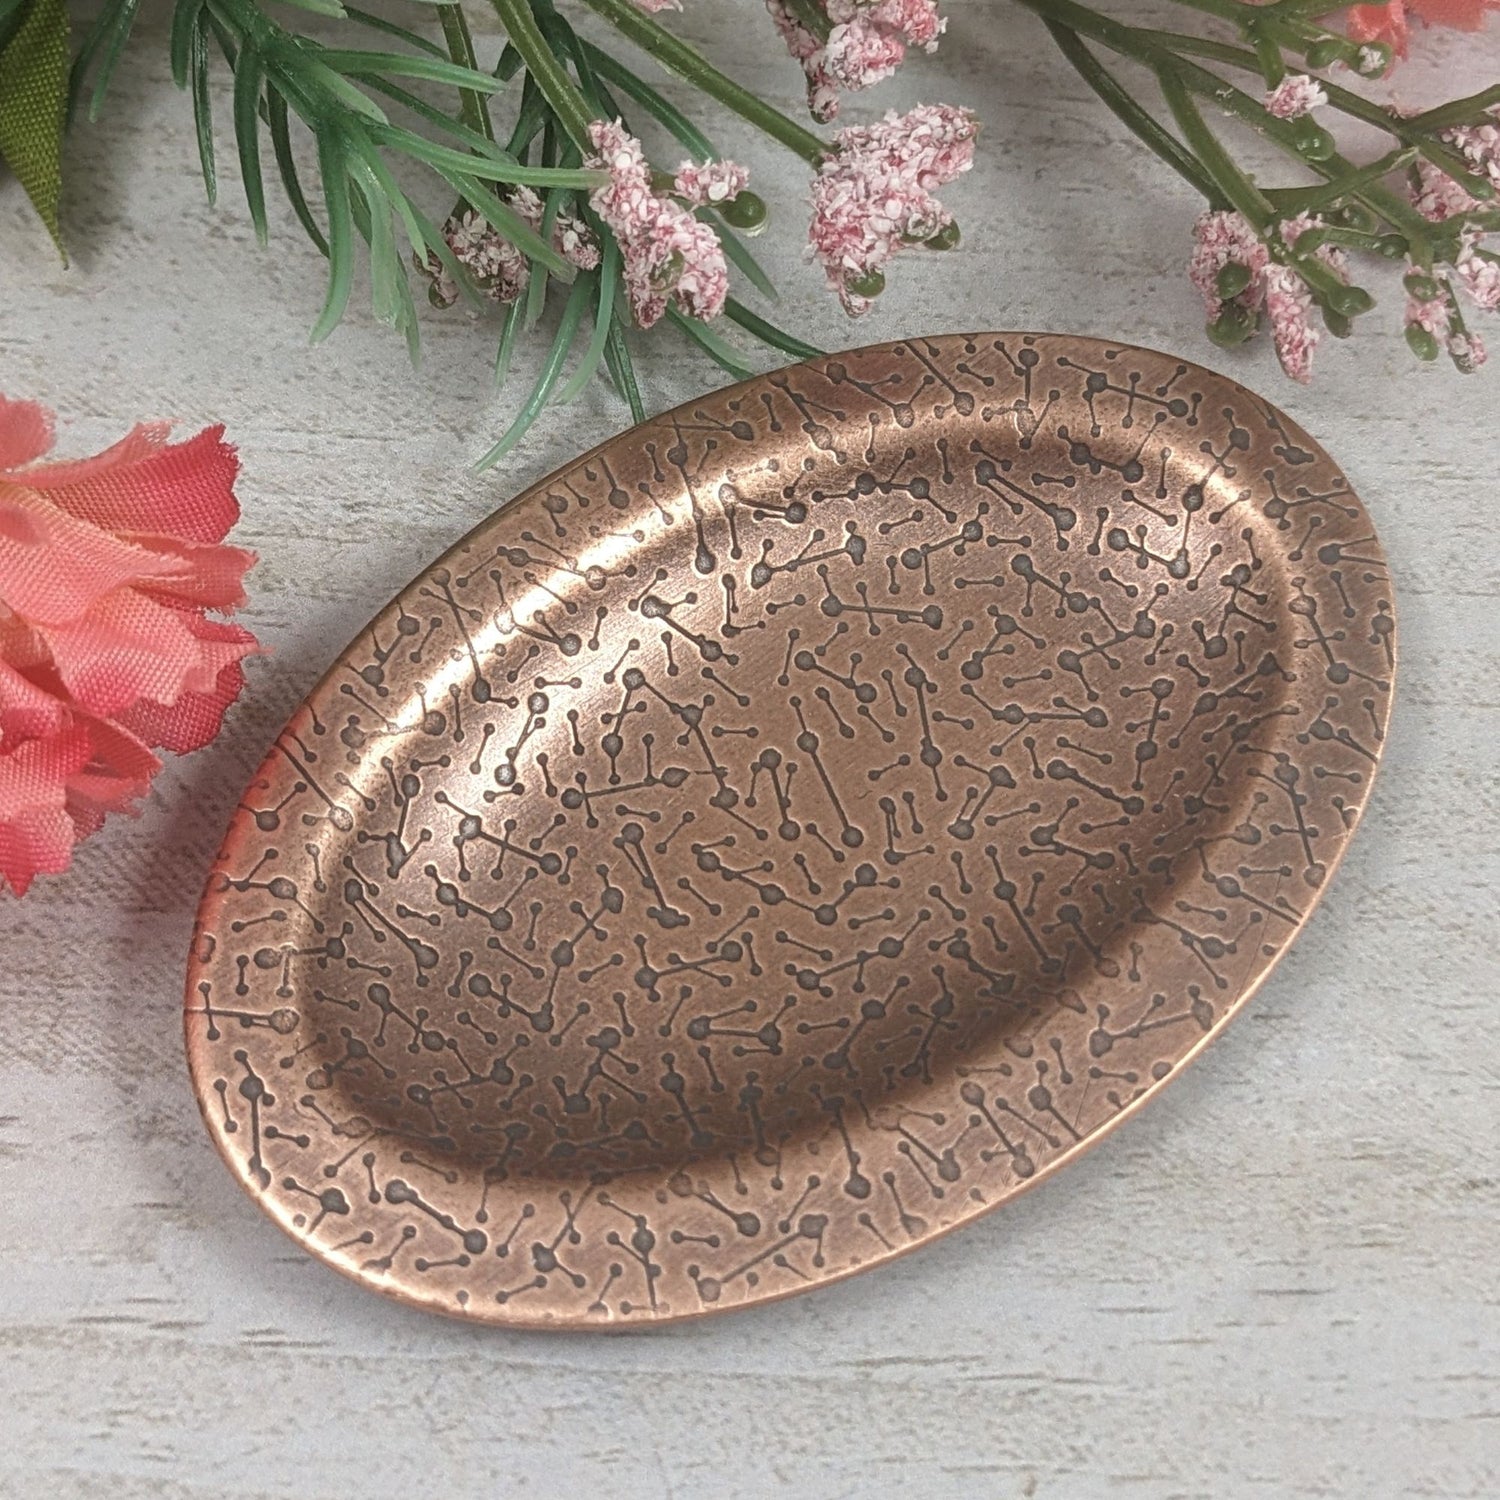 Oval ring dish made of copper. The dish has a shallow bowl with a lip around the edge. It is covered in a pattern meant to represent a meteor shower. The pattern is impressed into the copper and is short lines with small solid circles at the end. The design is oxidized, which means the impressed parts are dark, almost black. Stages with flowers in background.